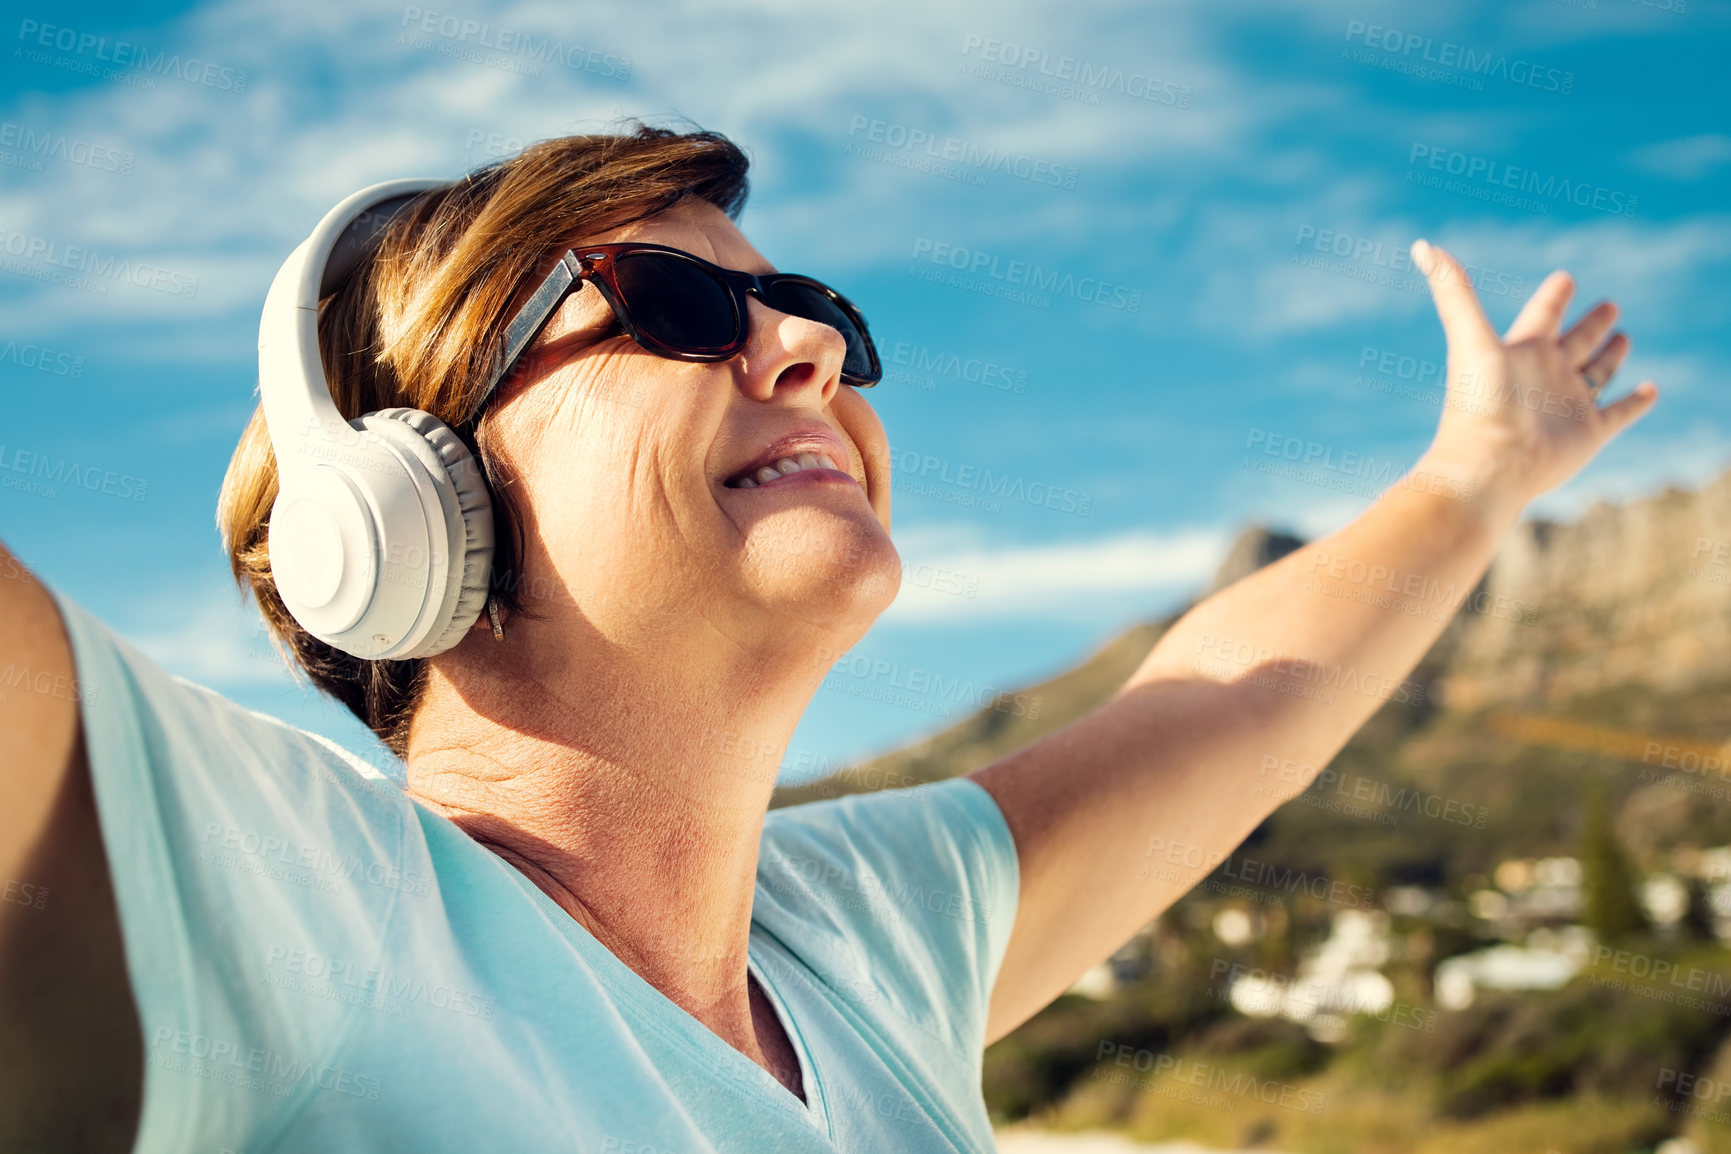 Buy stock photo Shot of a woman wearing headphones while standing outdoors